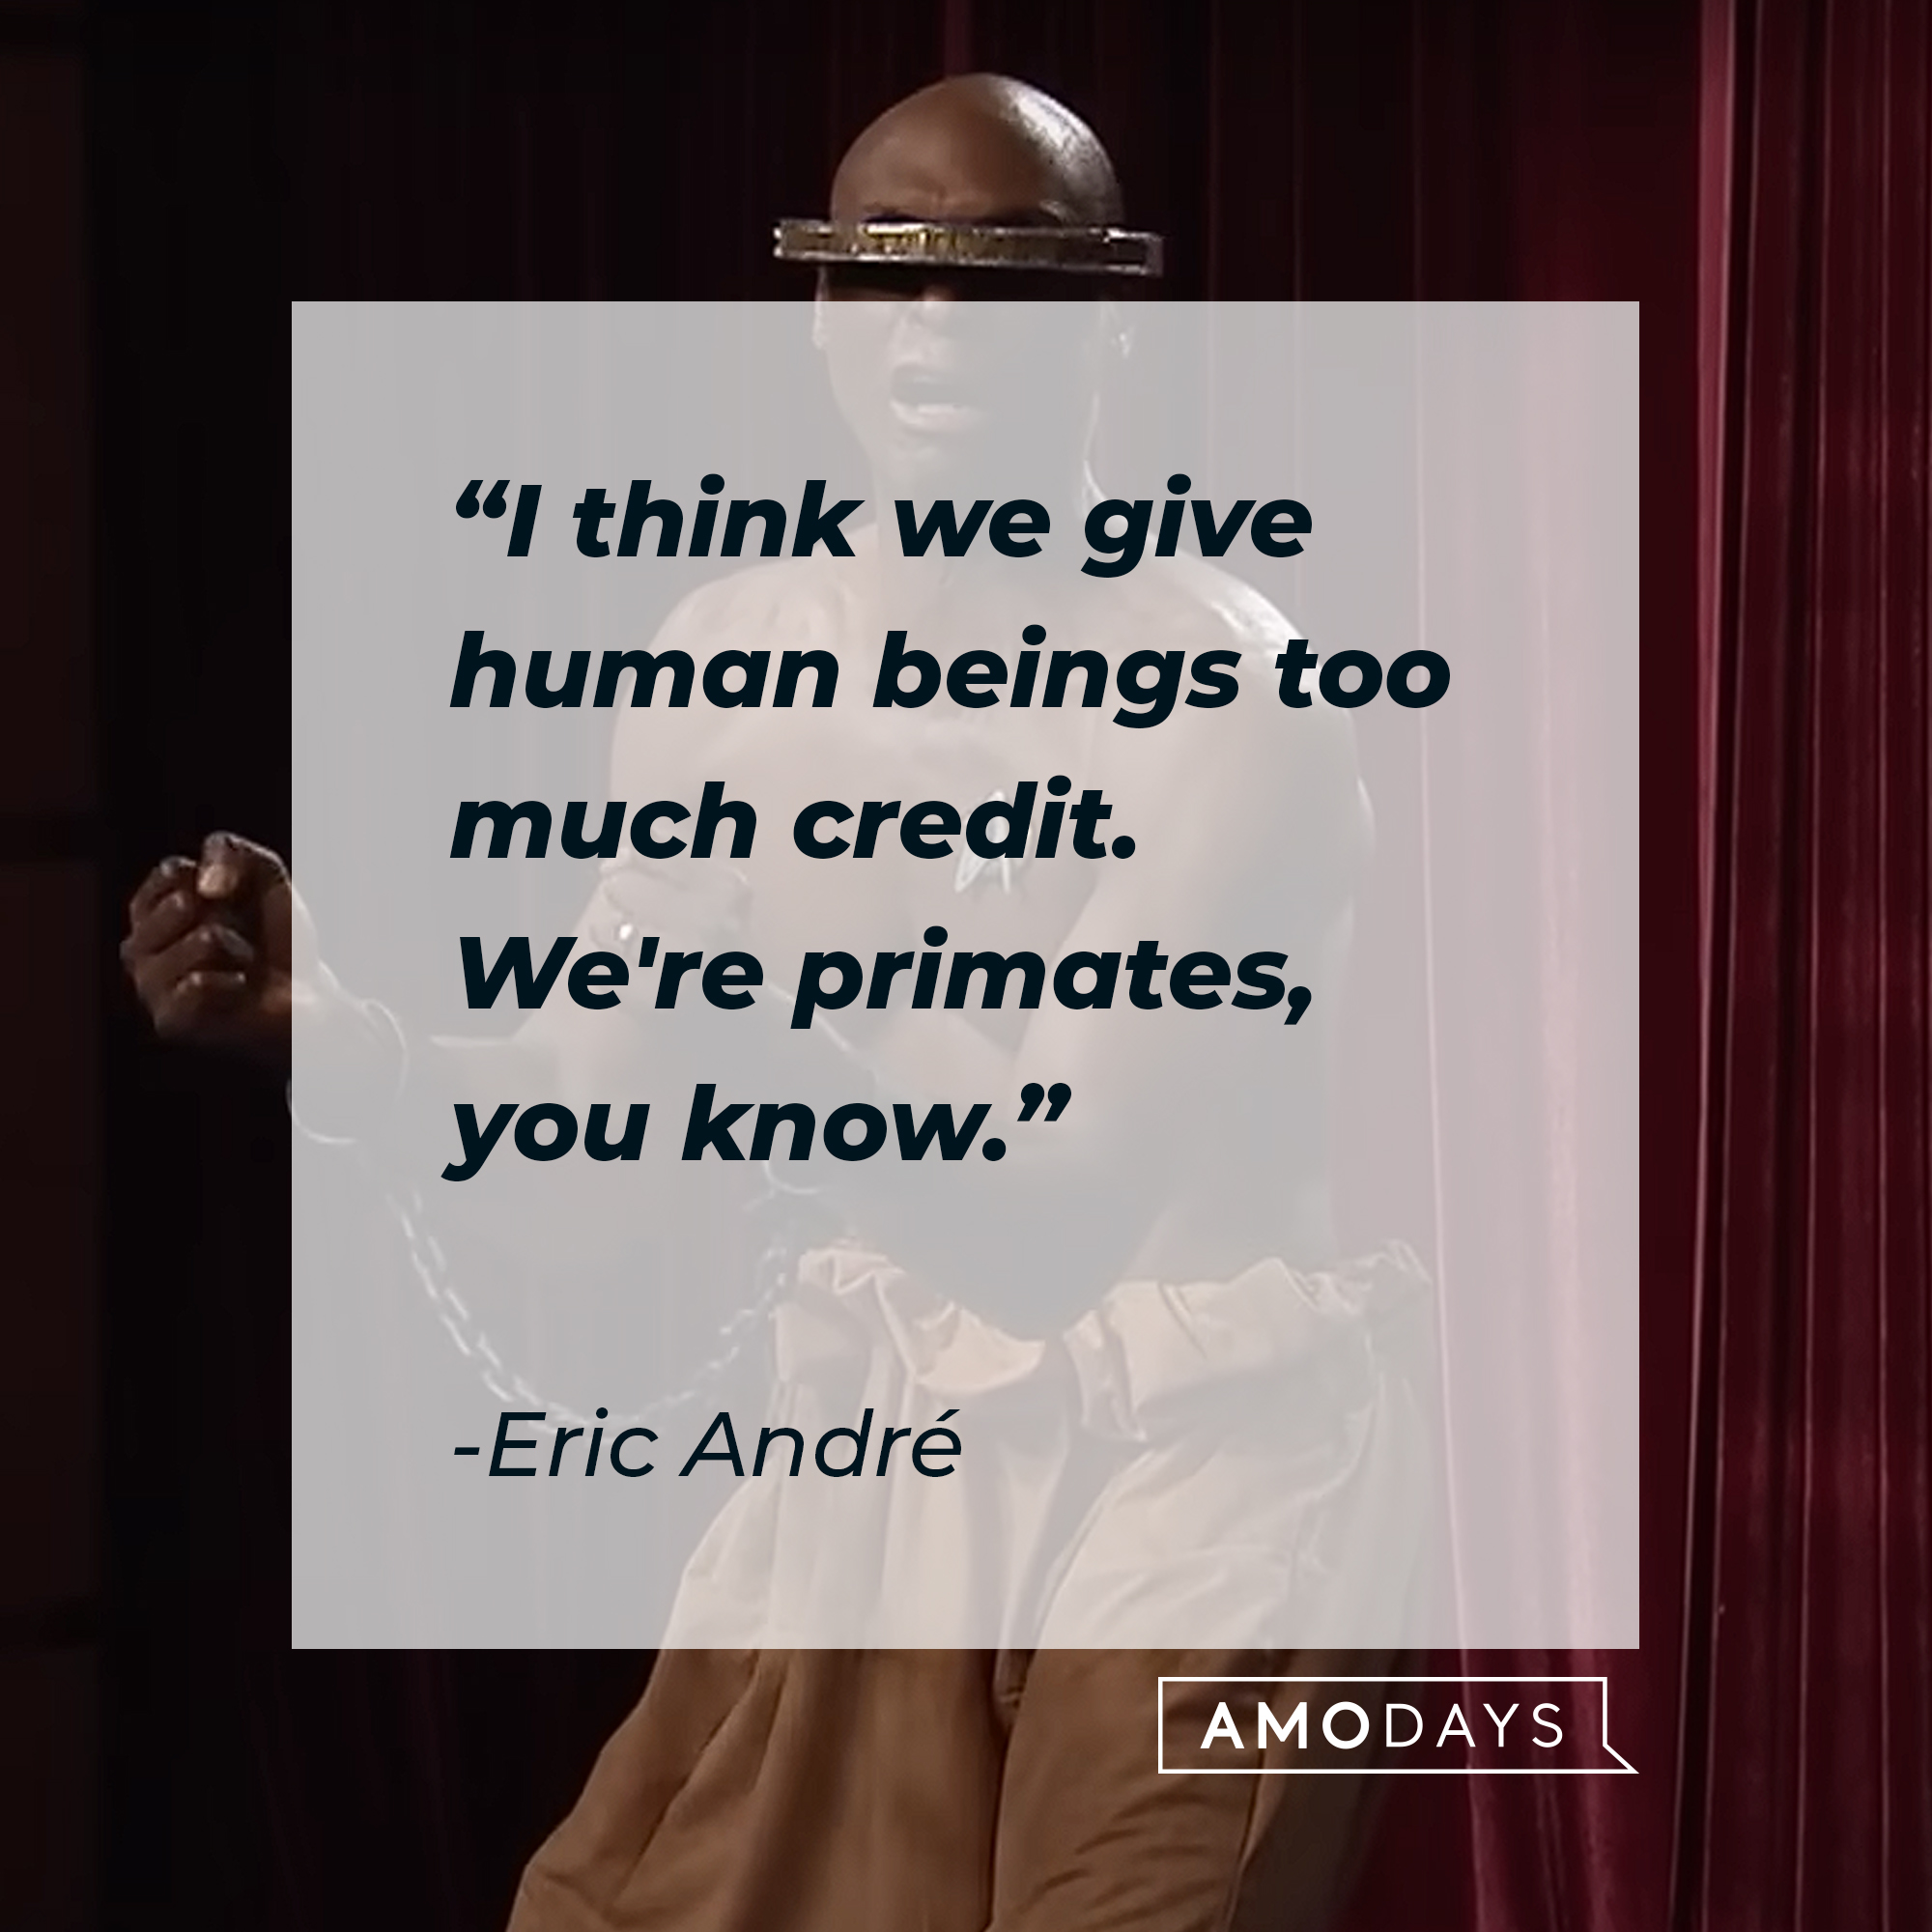 Eric André's quote: "I think we give human beings too much credit. We're primates, you know." | Source: Youtube.com/adultswim